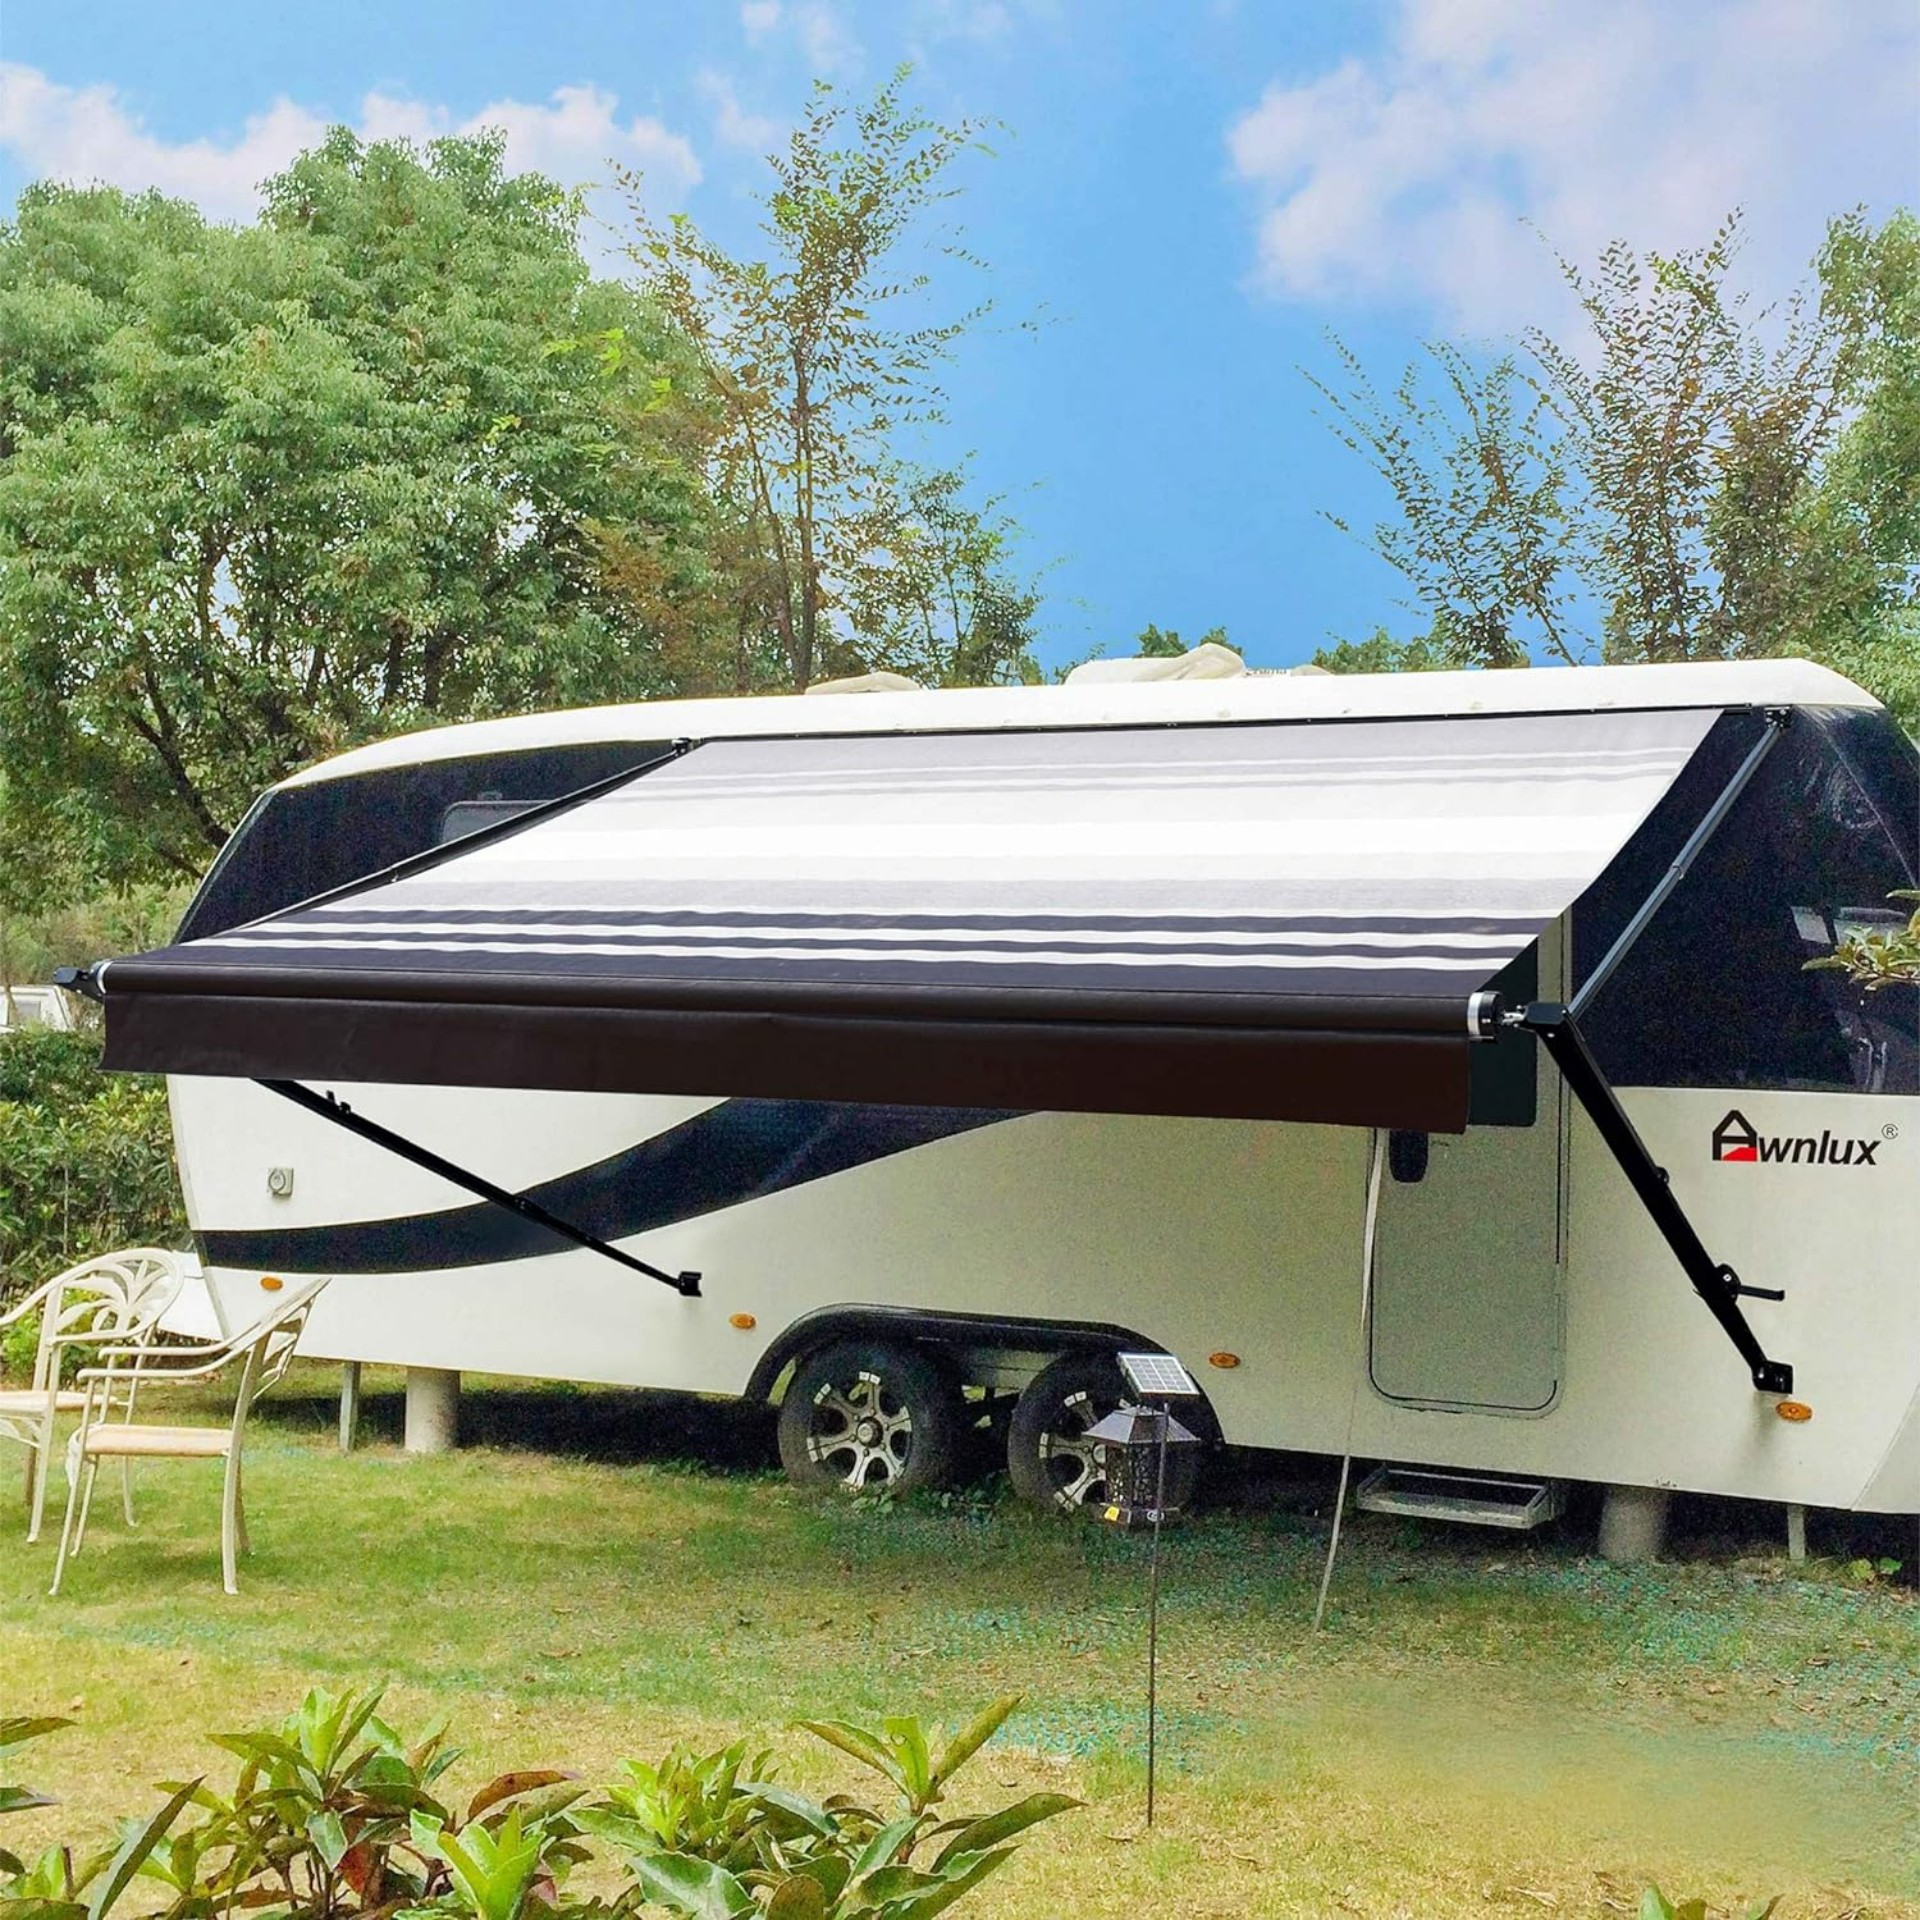 10 Must-Have Camper and RV Accessory Ideas for Your Next Epic